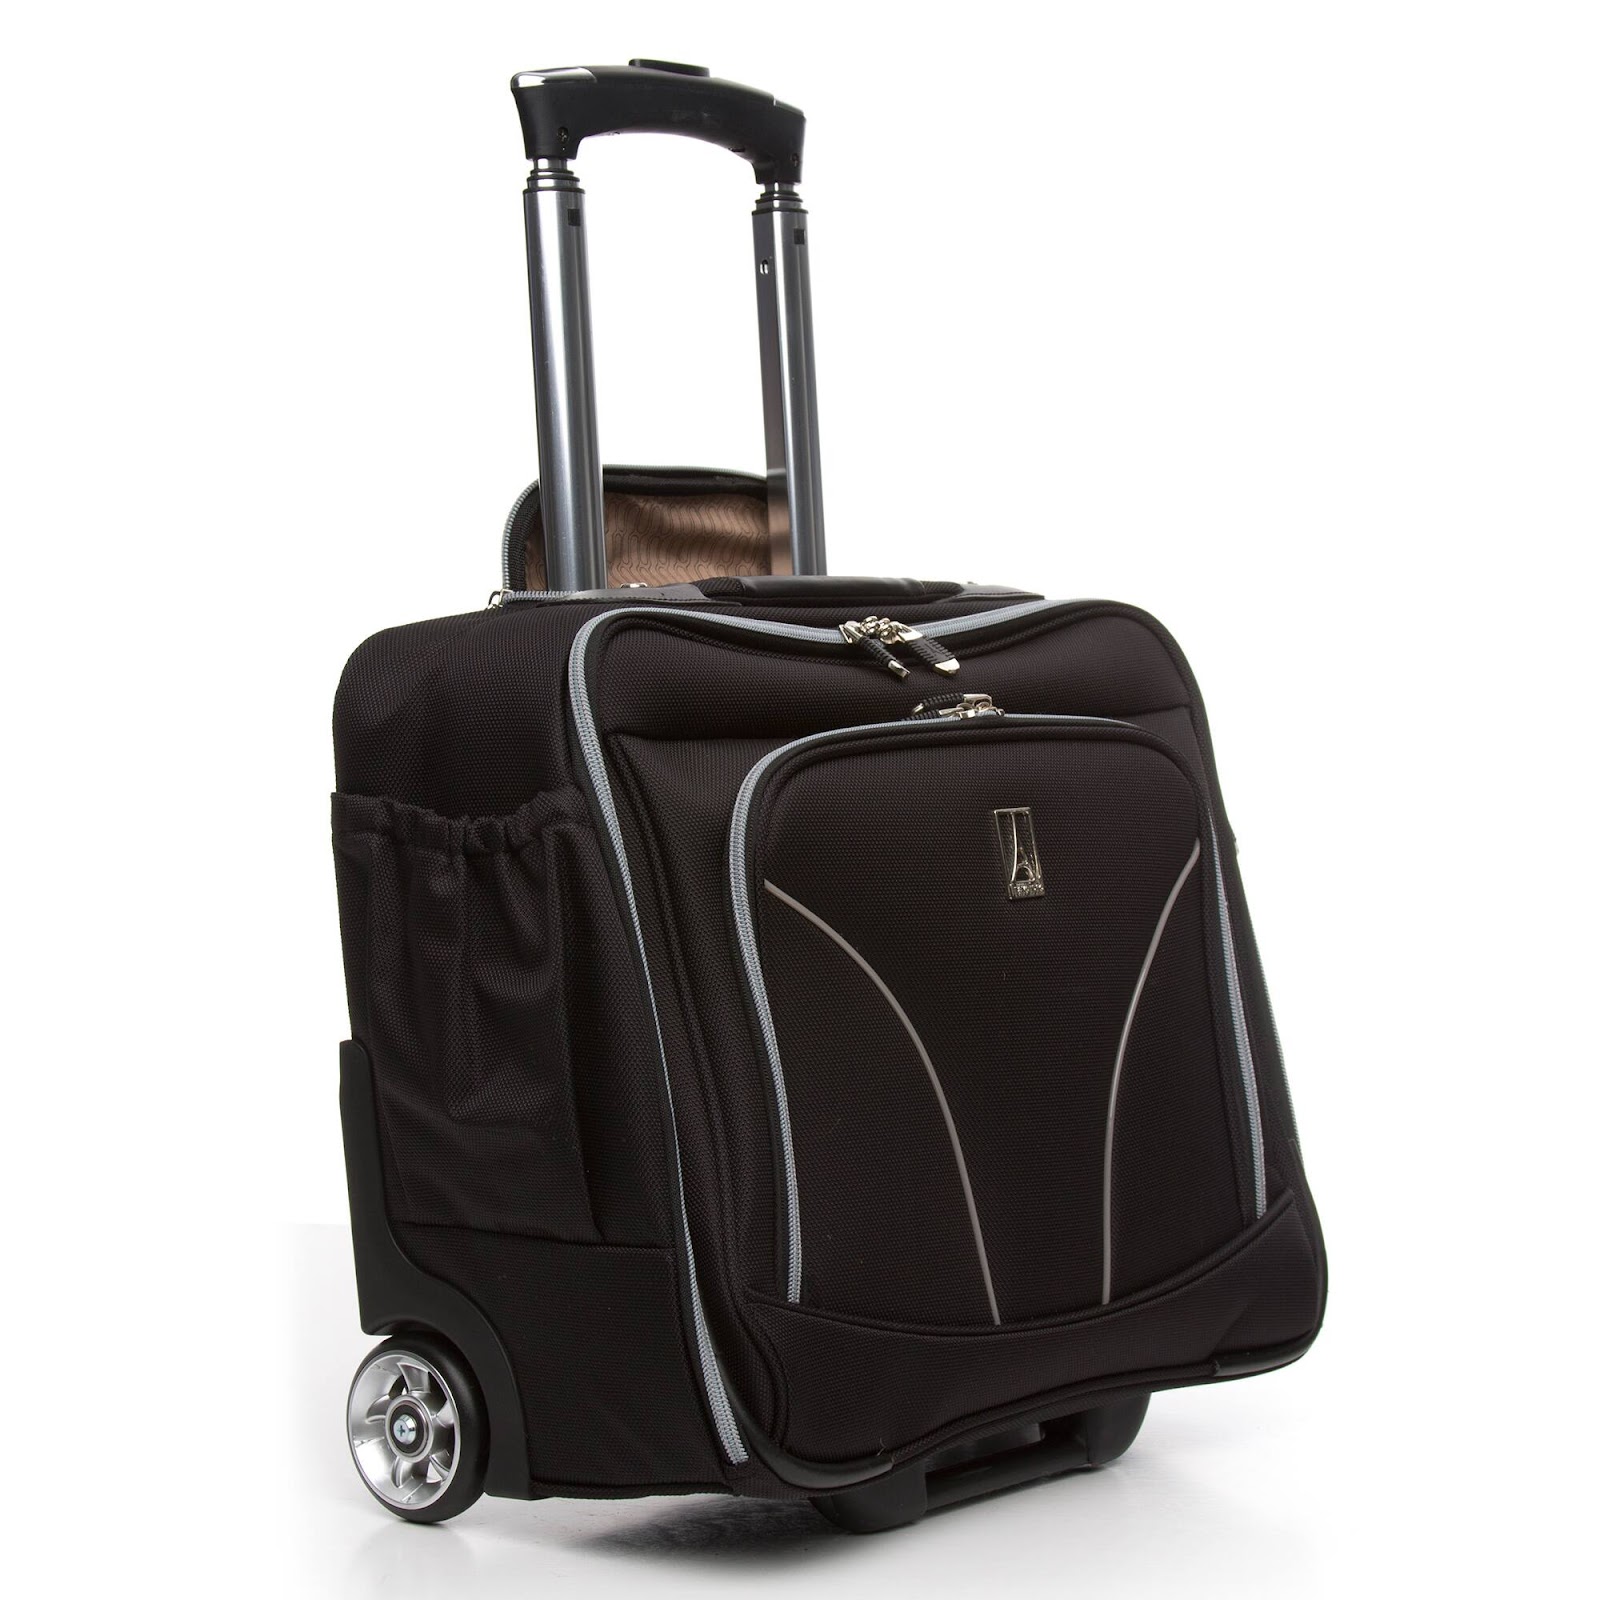 A TravelPro walkabout suitcase is shown in the picture while comparing it against Maxlite